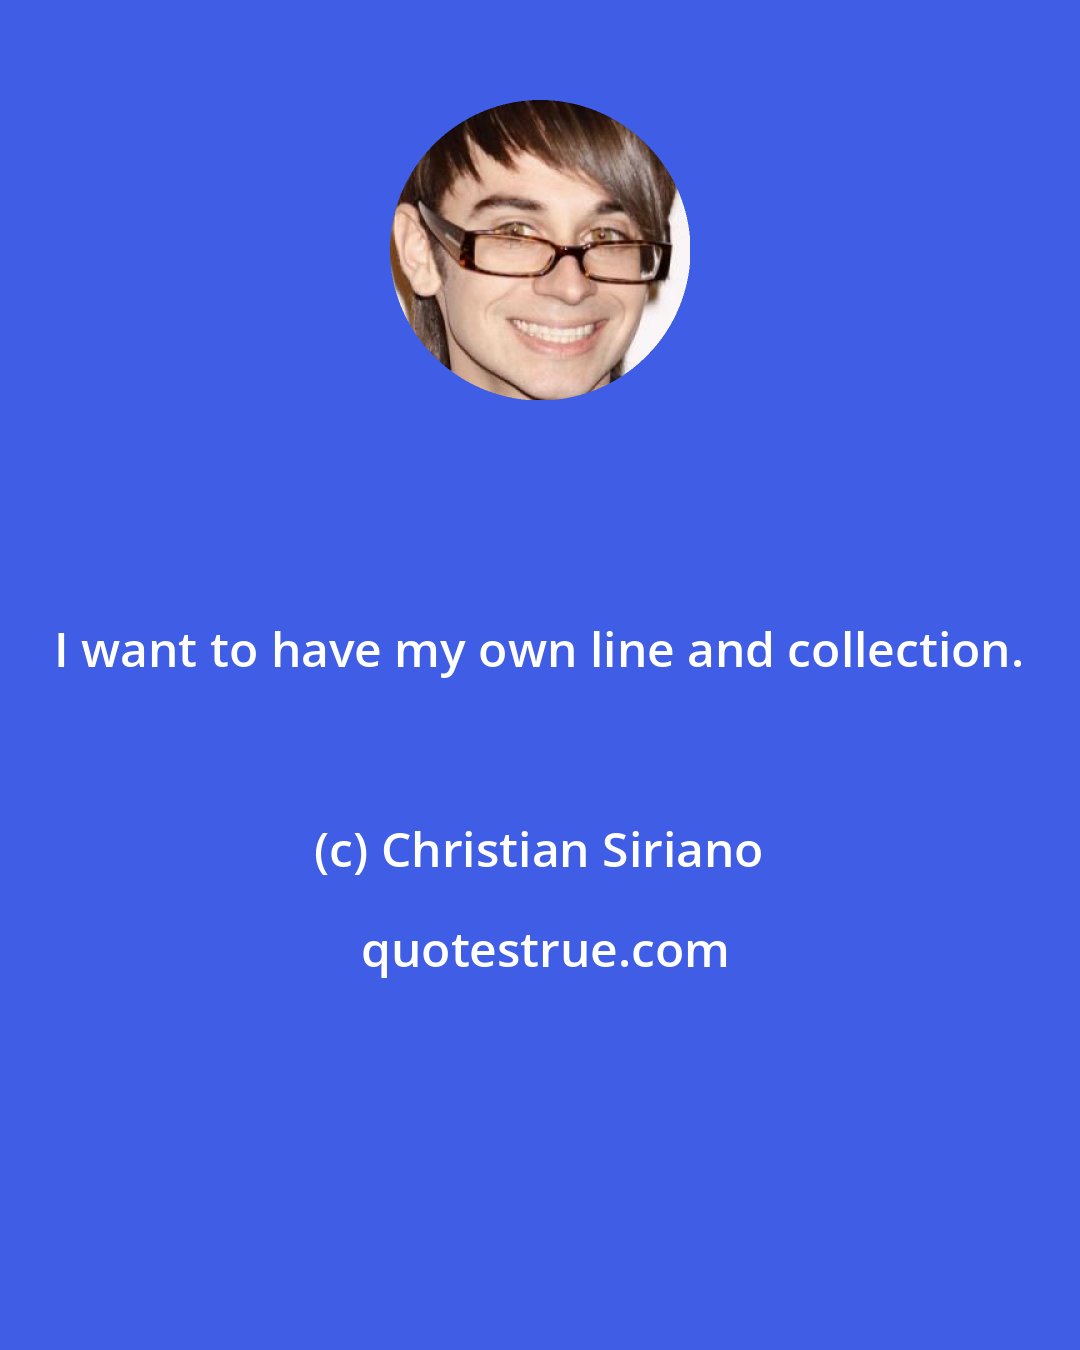 Christian Siriano: I want to have my own line and collection.